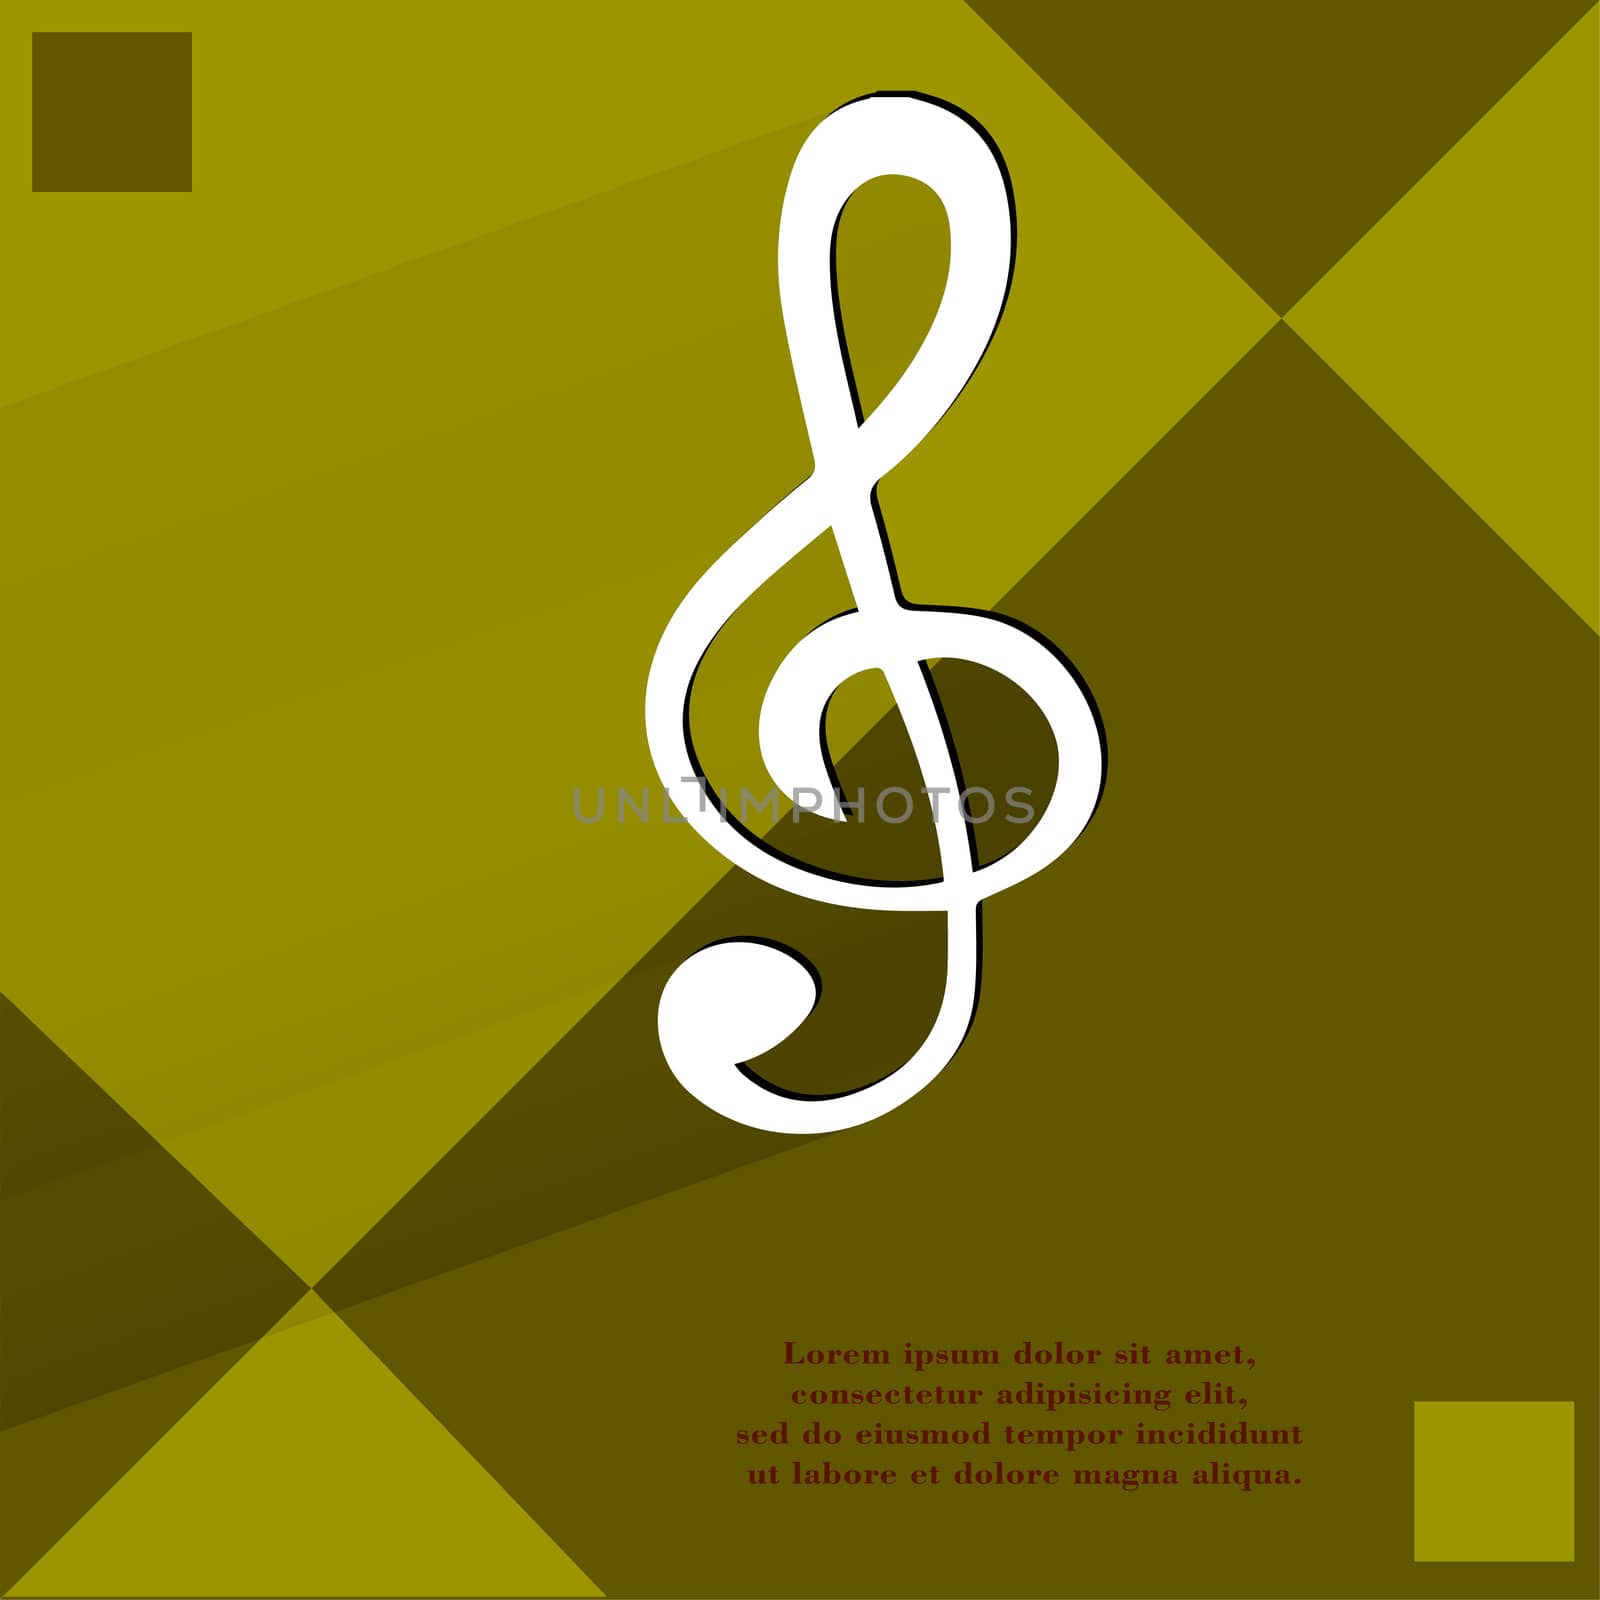 Music elements notes web icon  on a flat geometric abstract background  